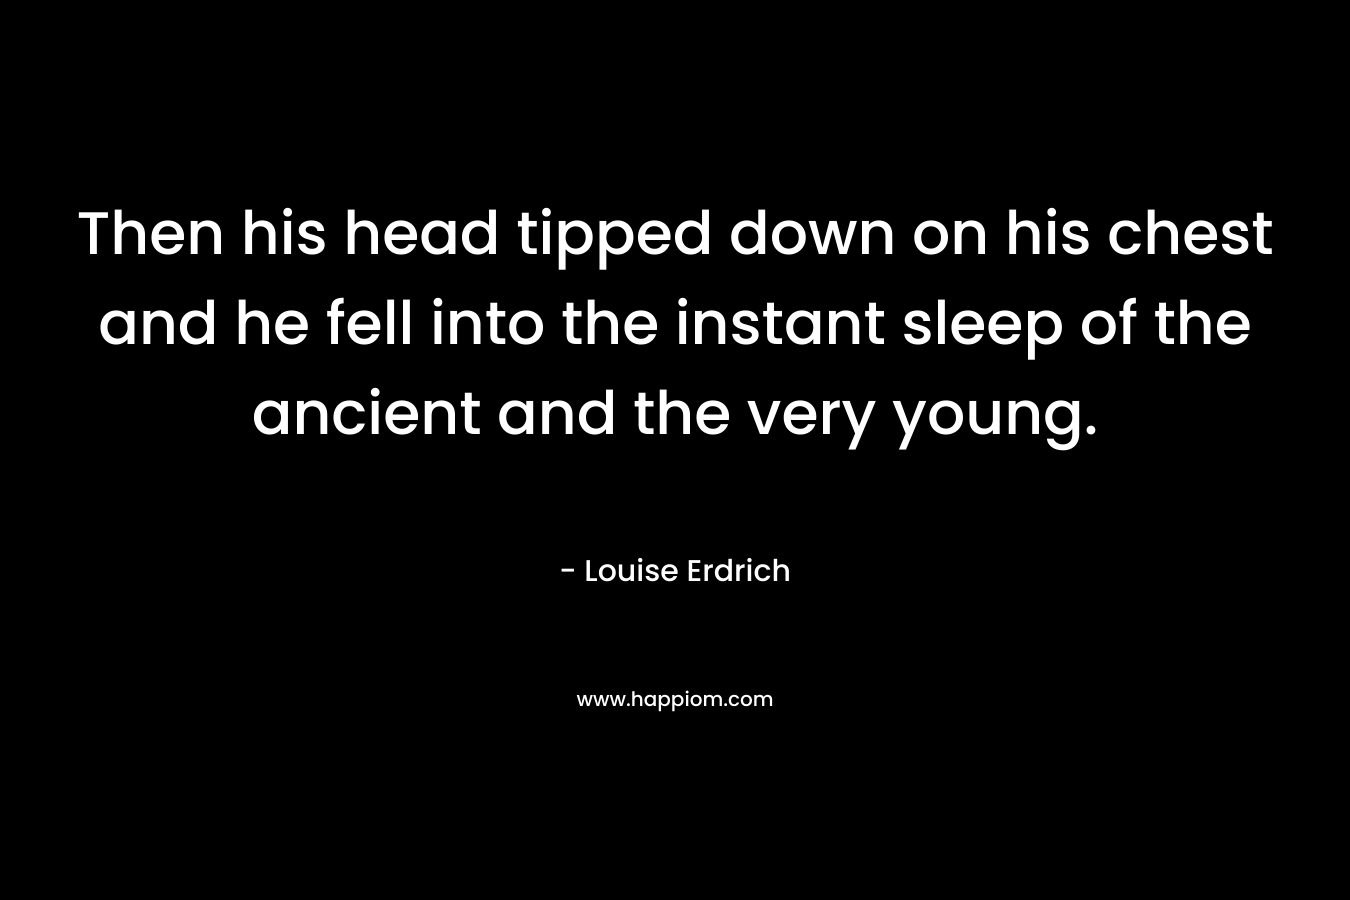 Then his head tipped down on his chest and he fell into the instant sleep of the ancient and the very young. – Louise Erdrich